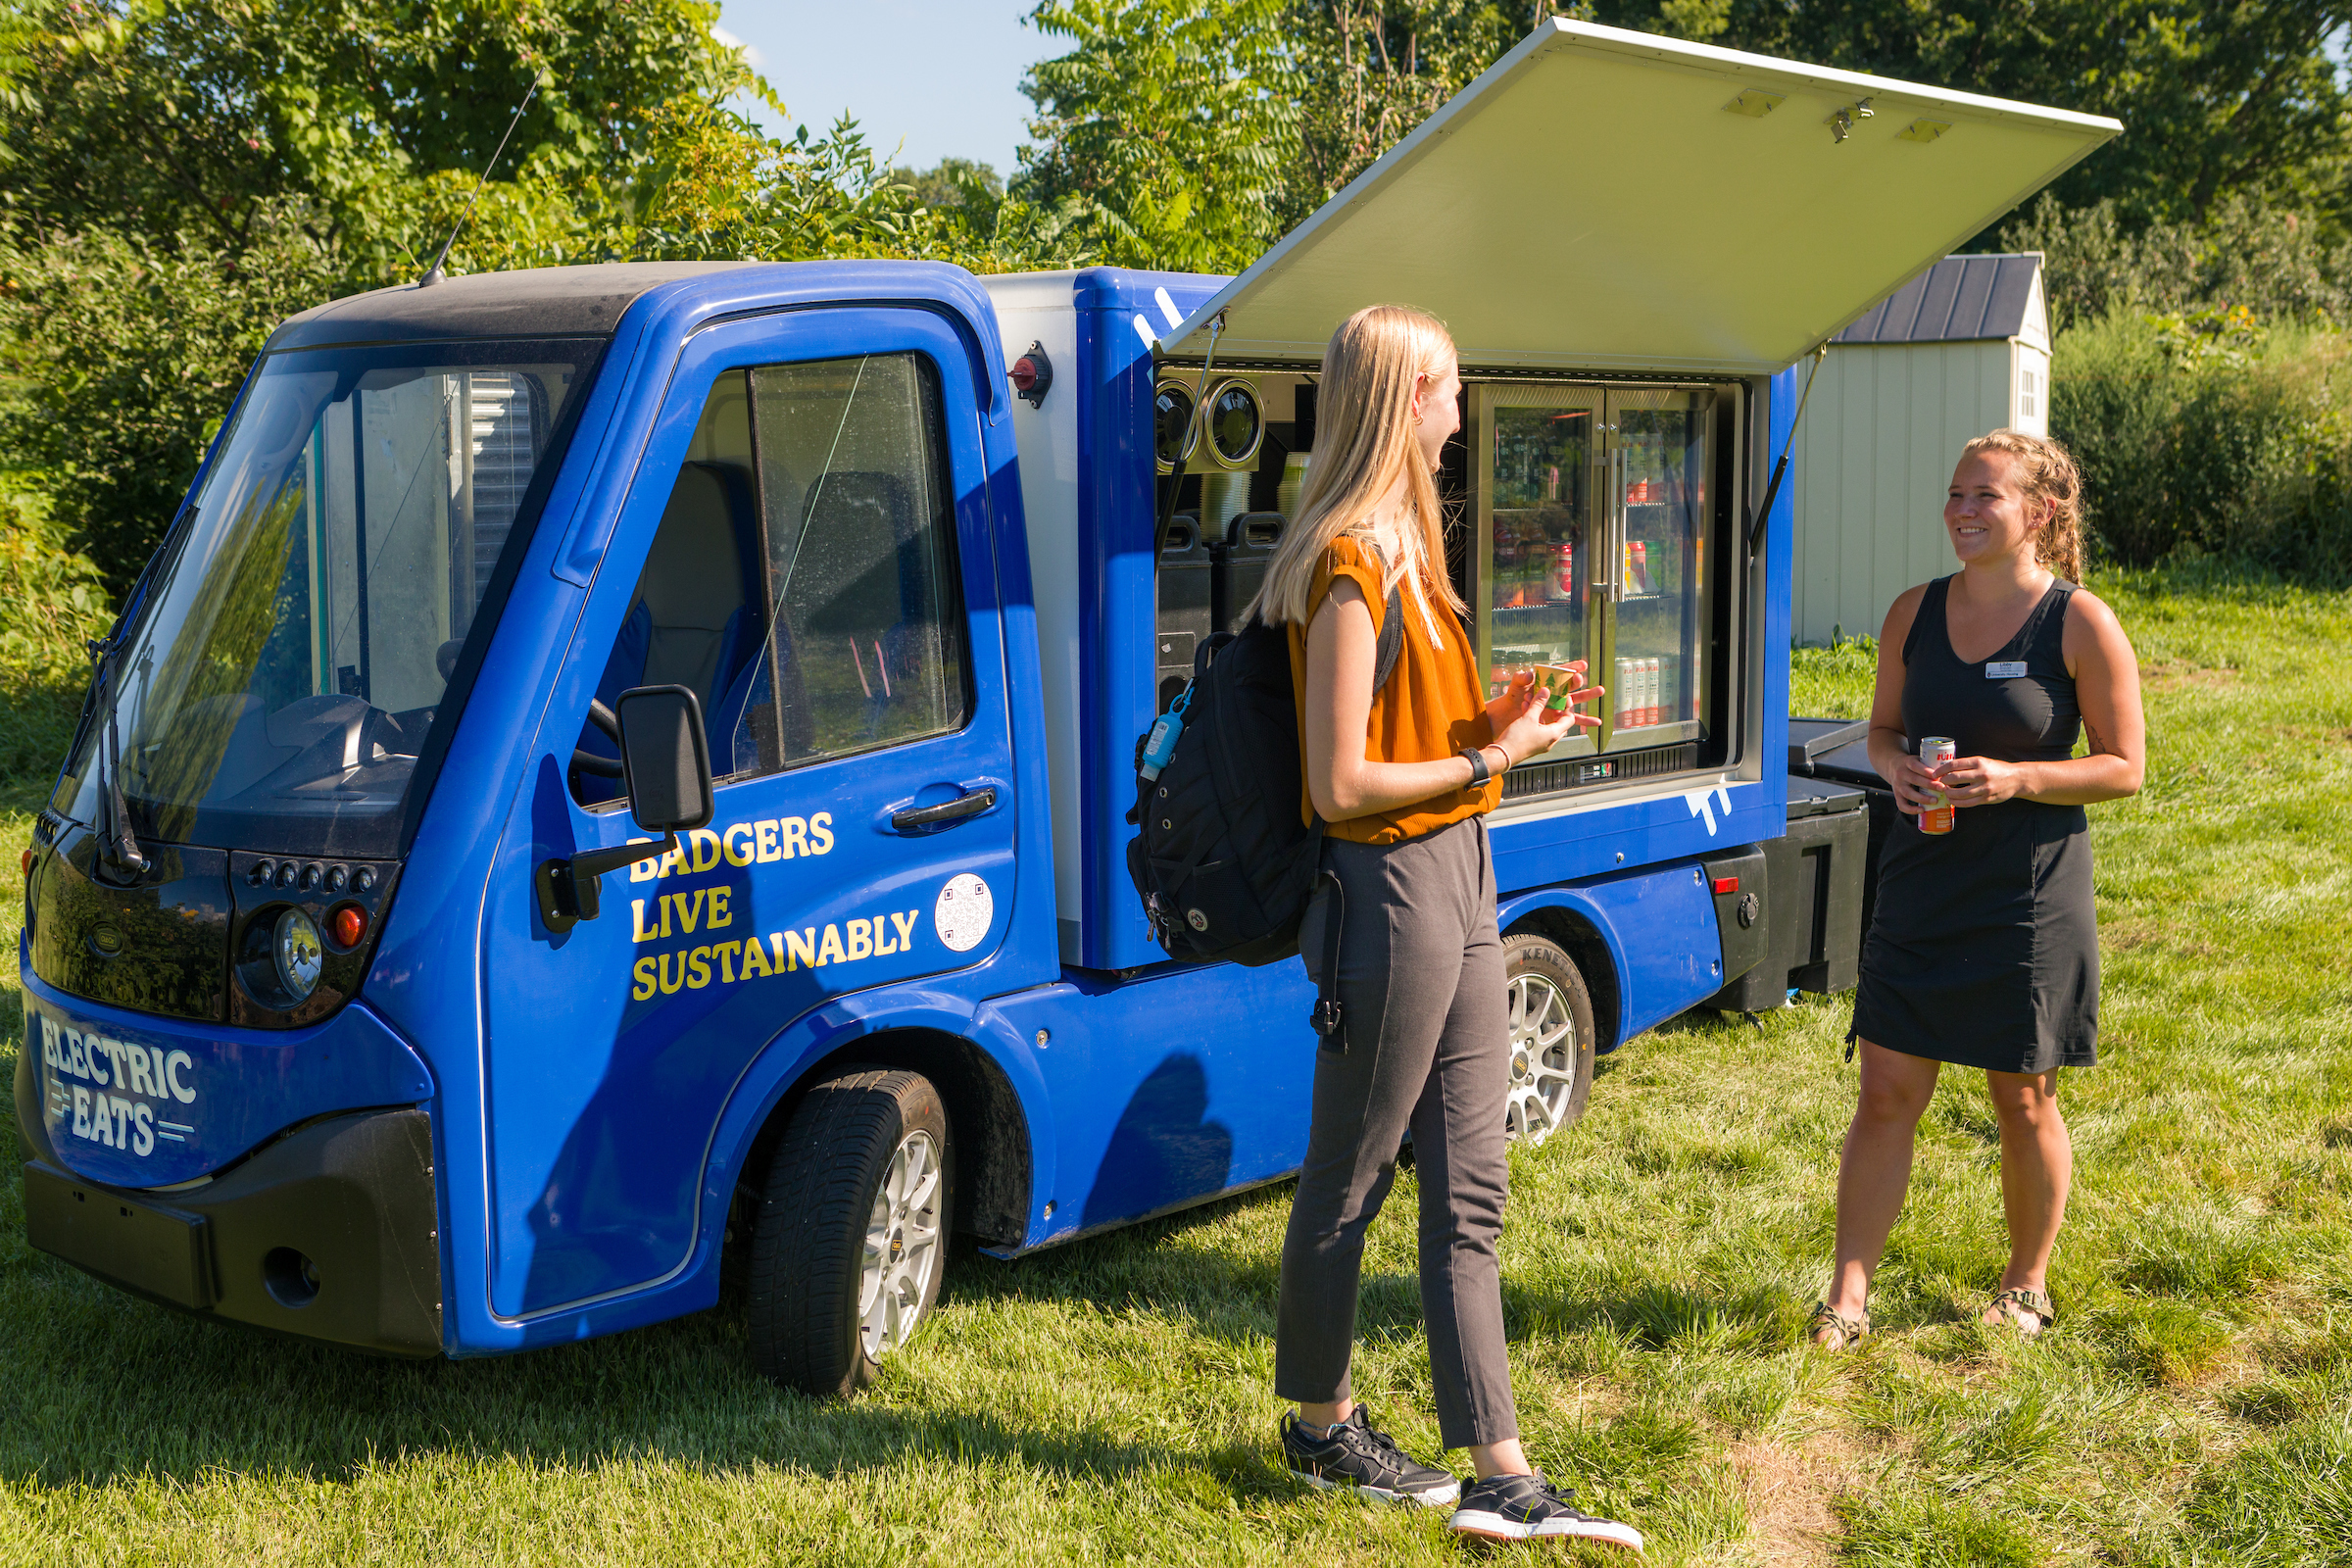 Two students chatting in front of the Electric Eats food truck